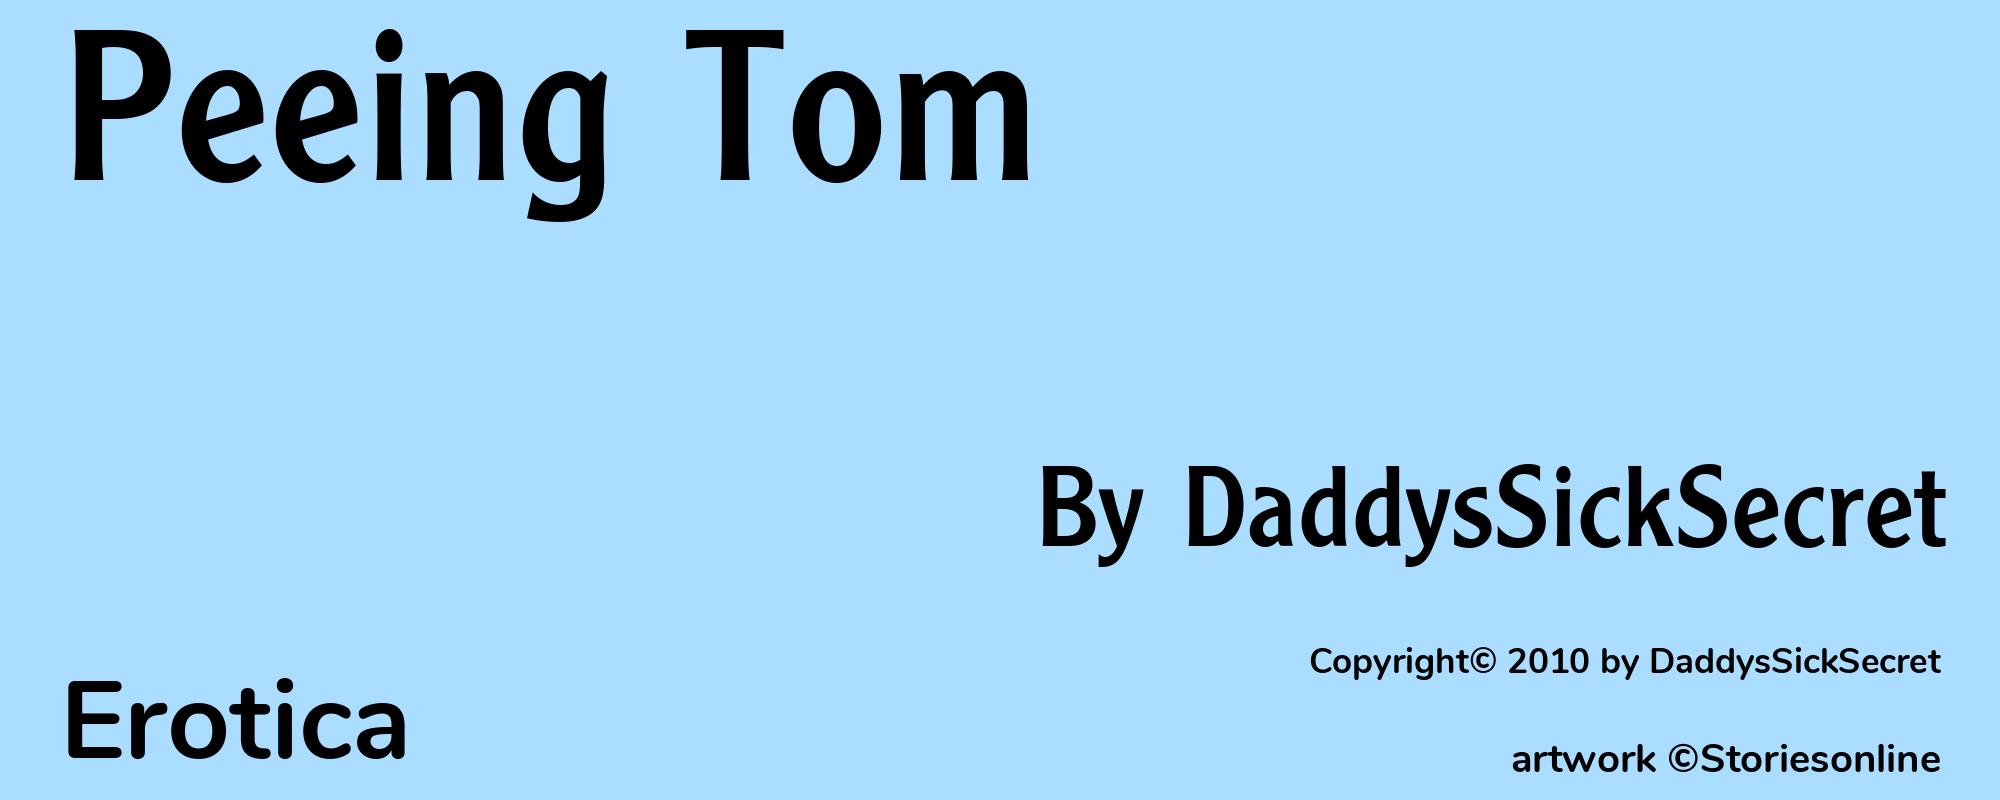 Peeing Tom - Cover